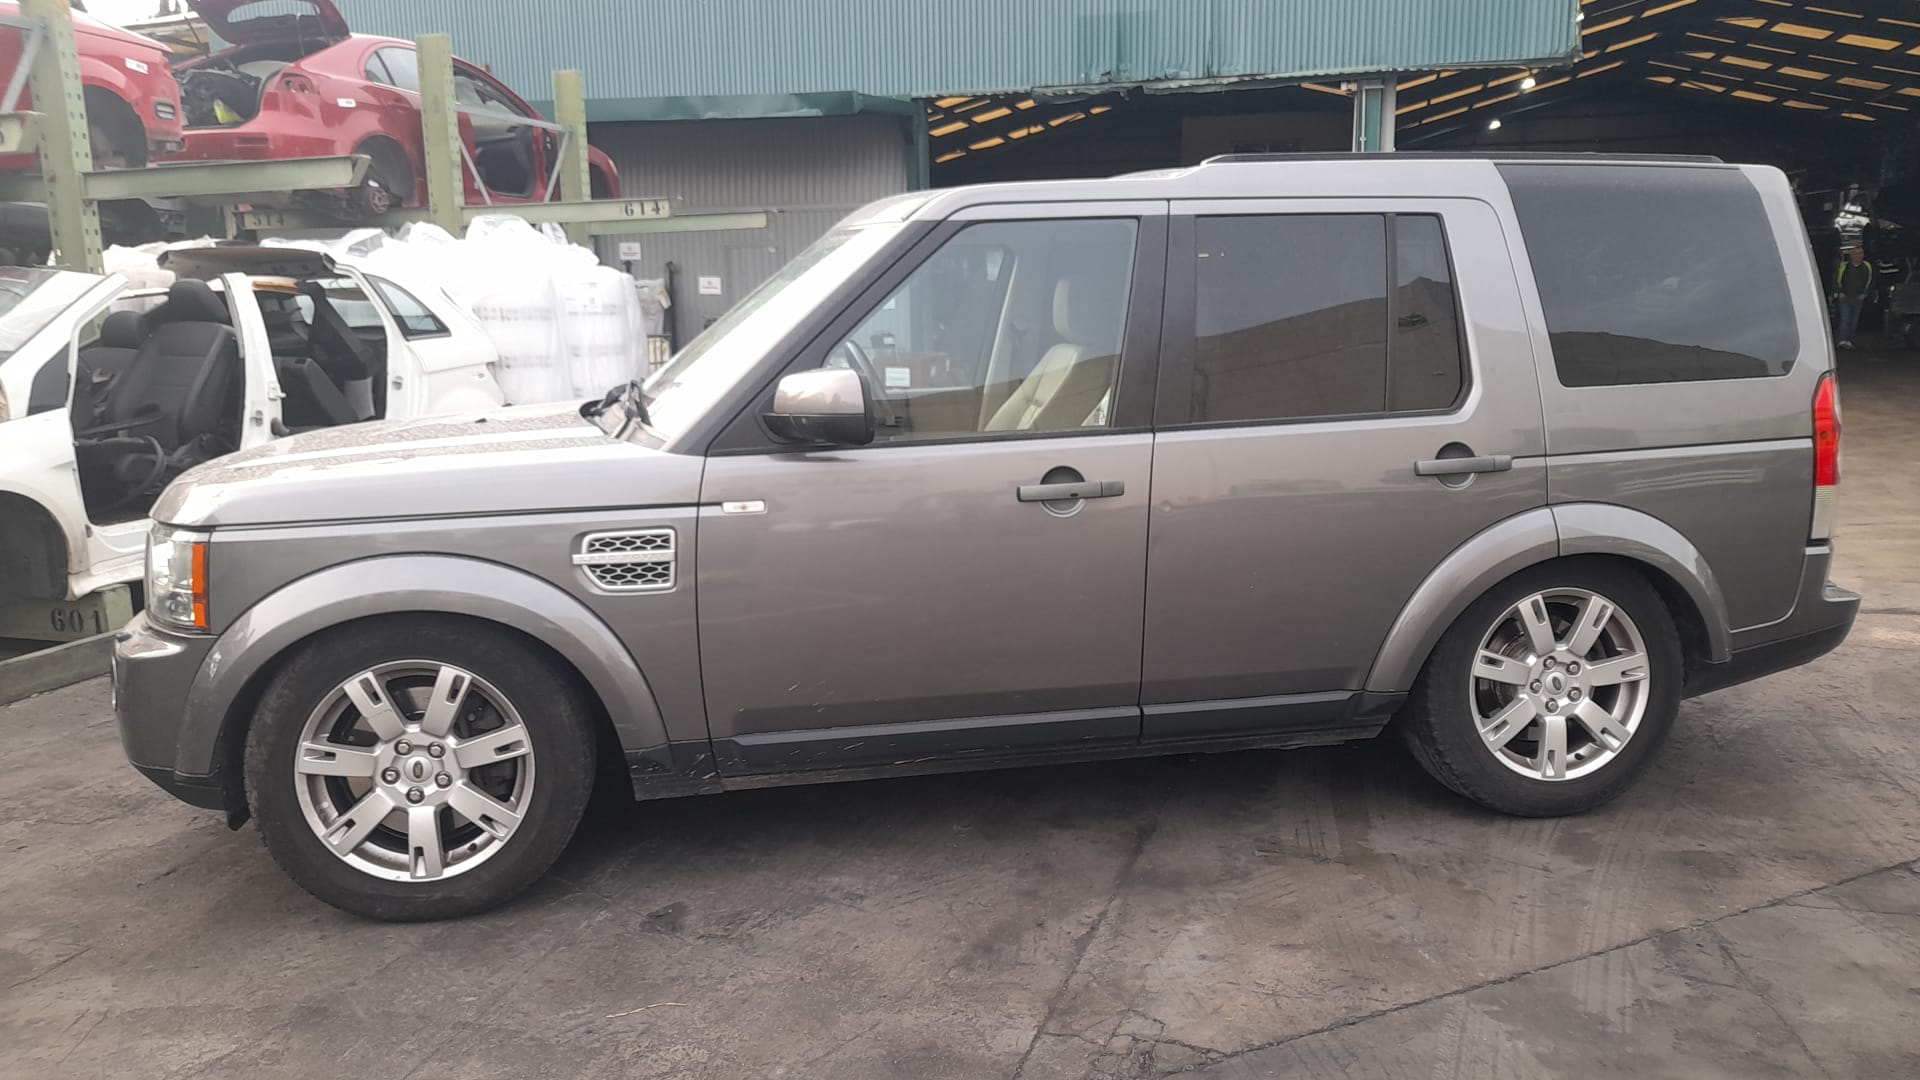 LAND ROVER Discovery 4 generation (2009-2016) Раздатка IAB500280, 4H227K780CA, A0640652 24548465